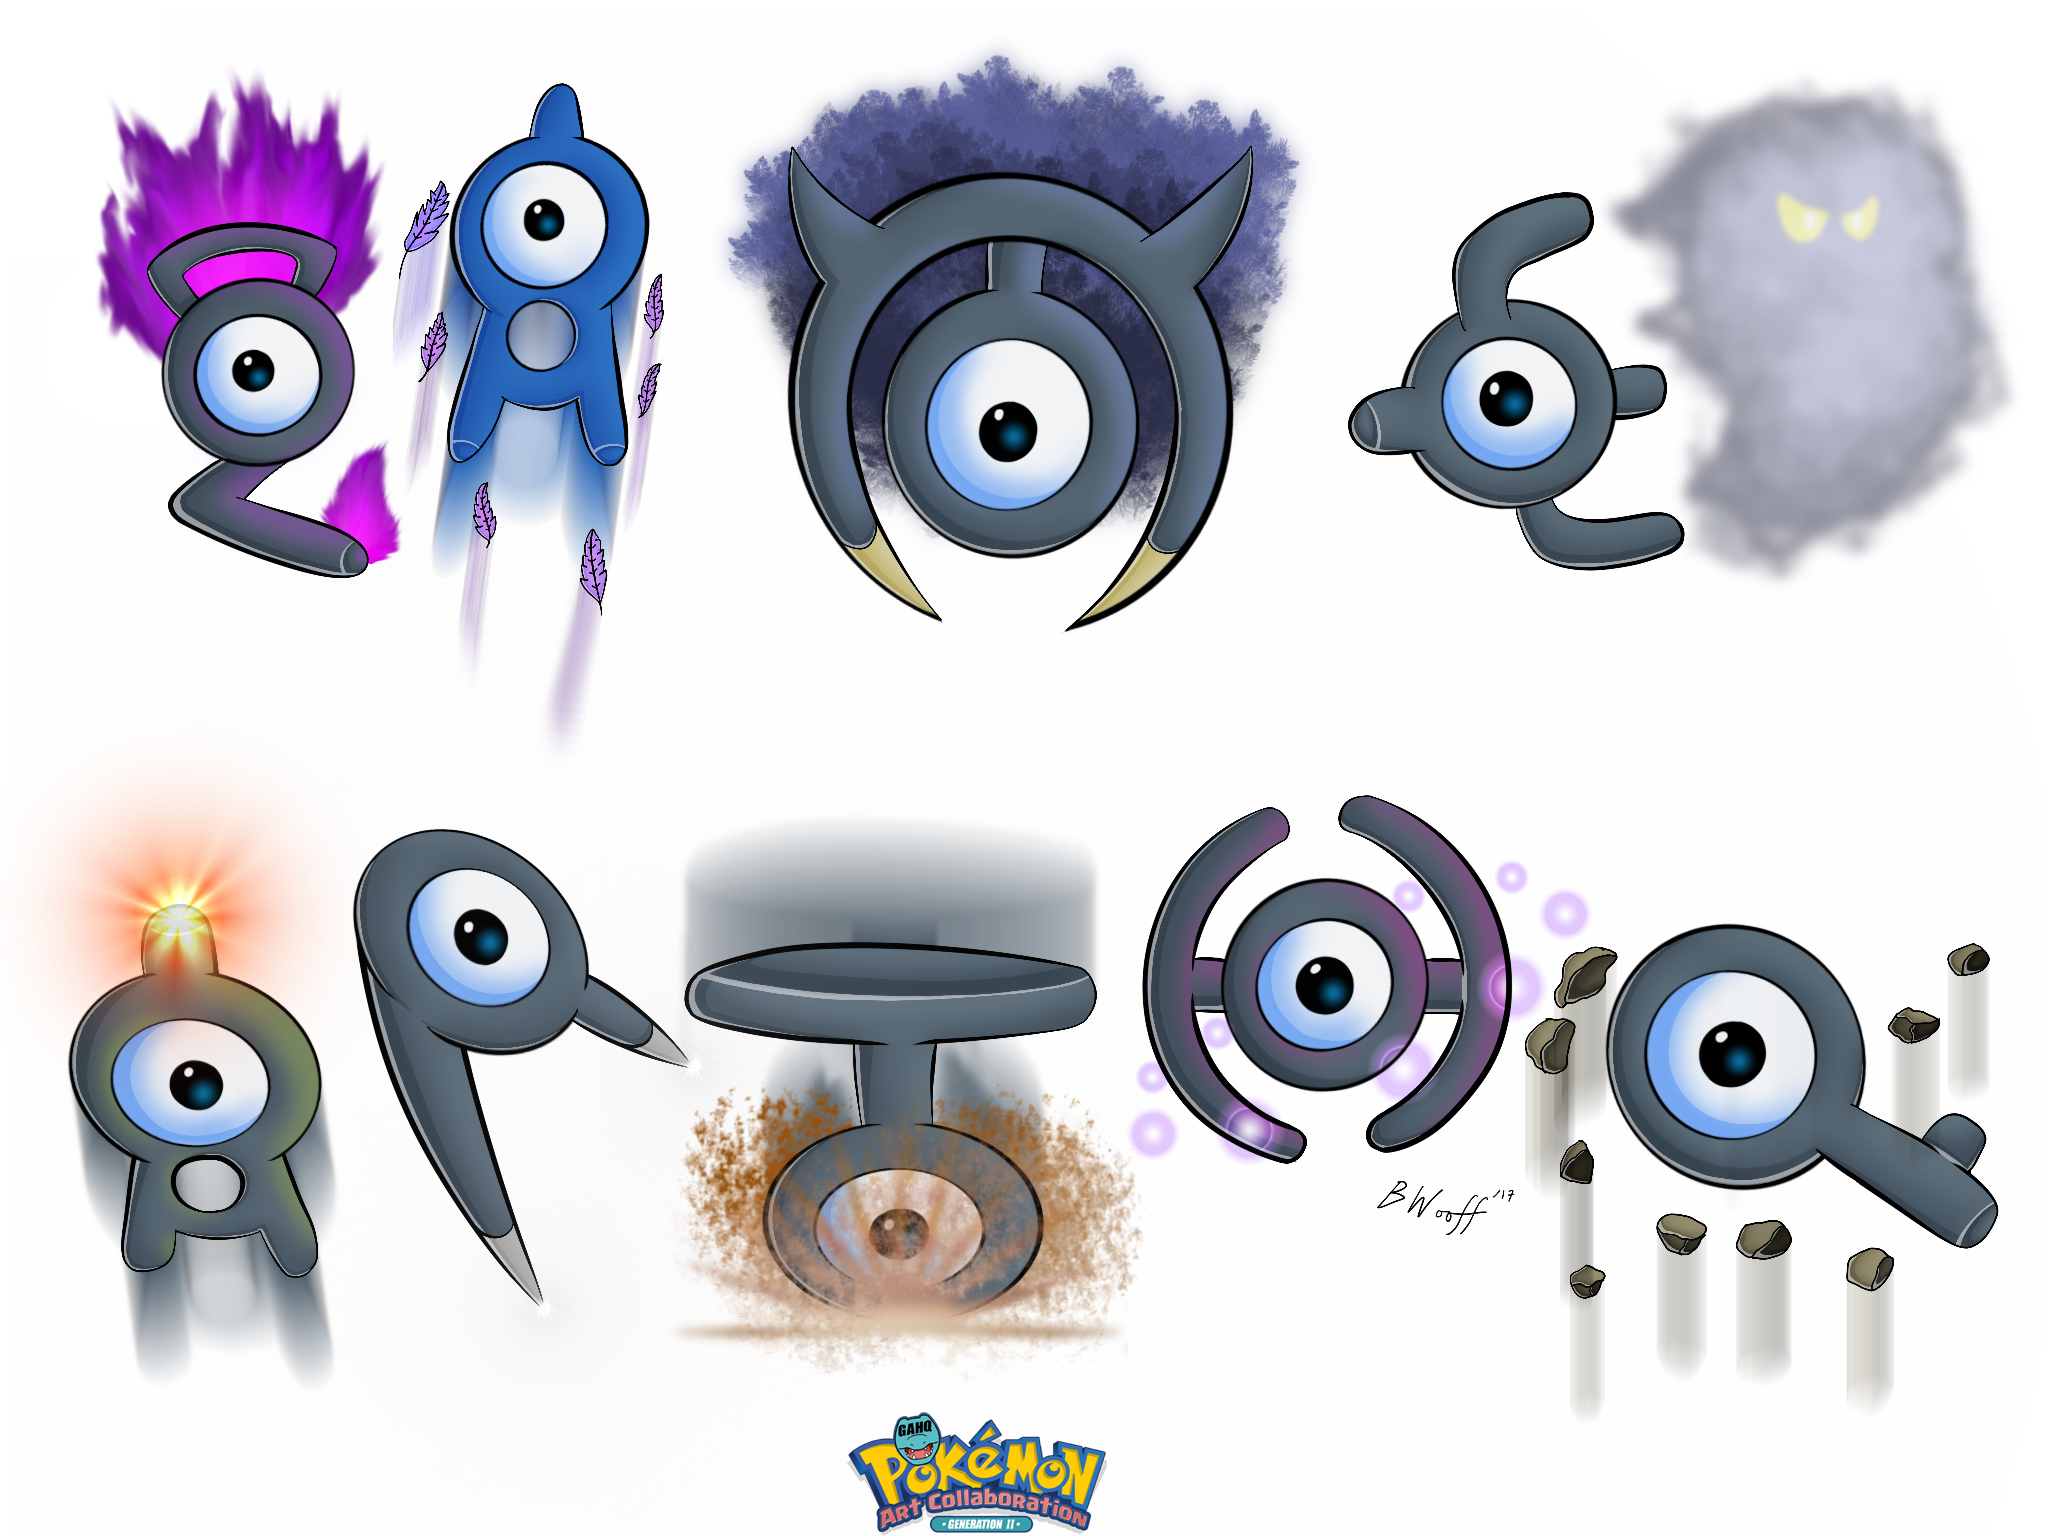 Pokémon by Review: #201: Unown